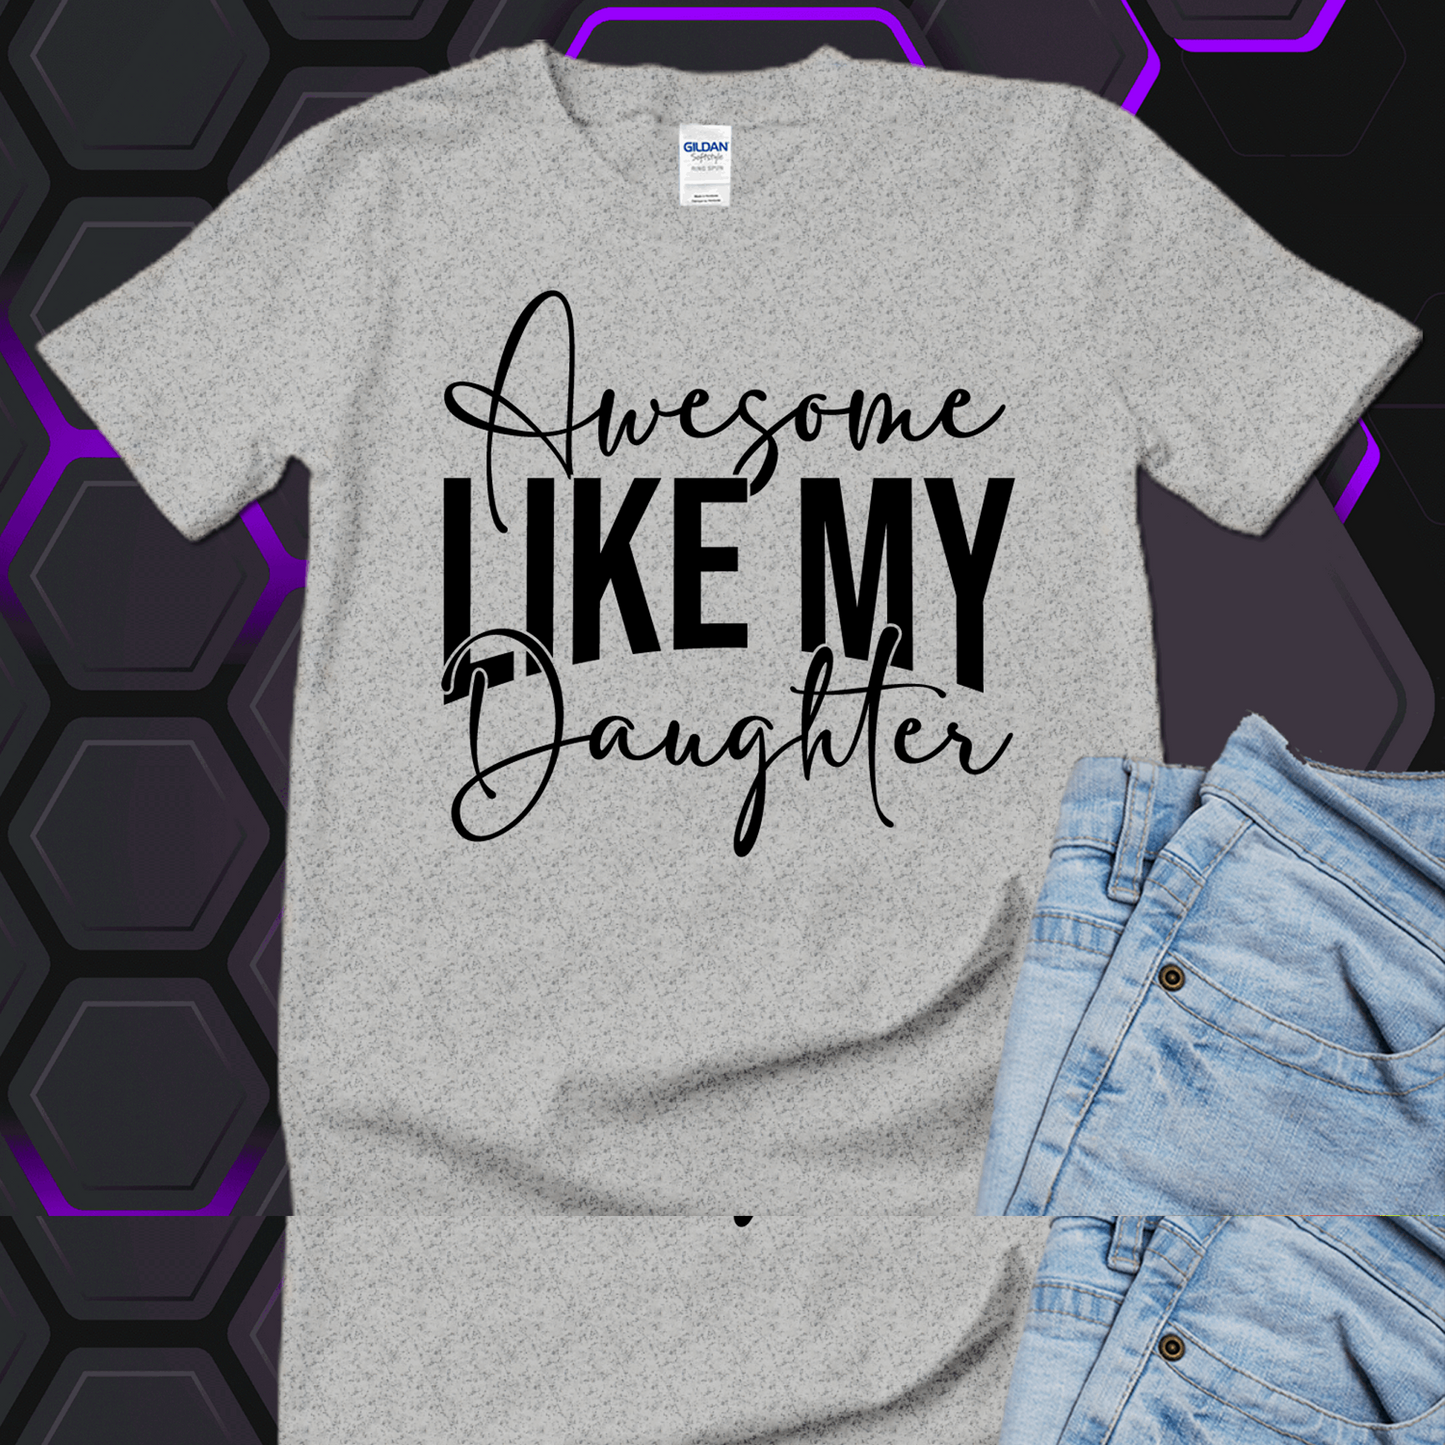 Awesome like my daughter shirt, awesome like my daughter Hoodie, Gift for Father - Wilson Design Group